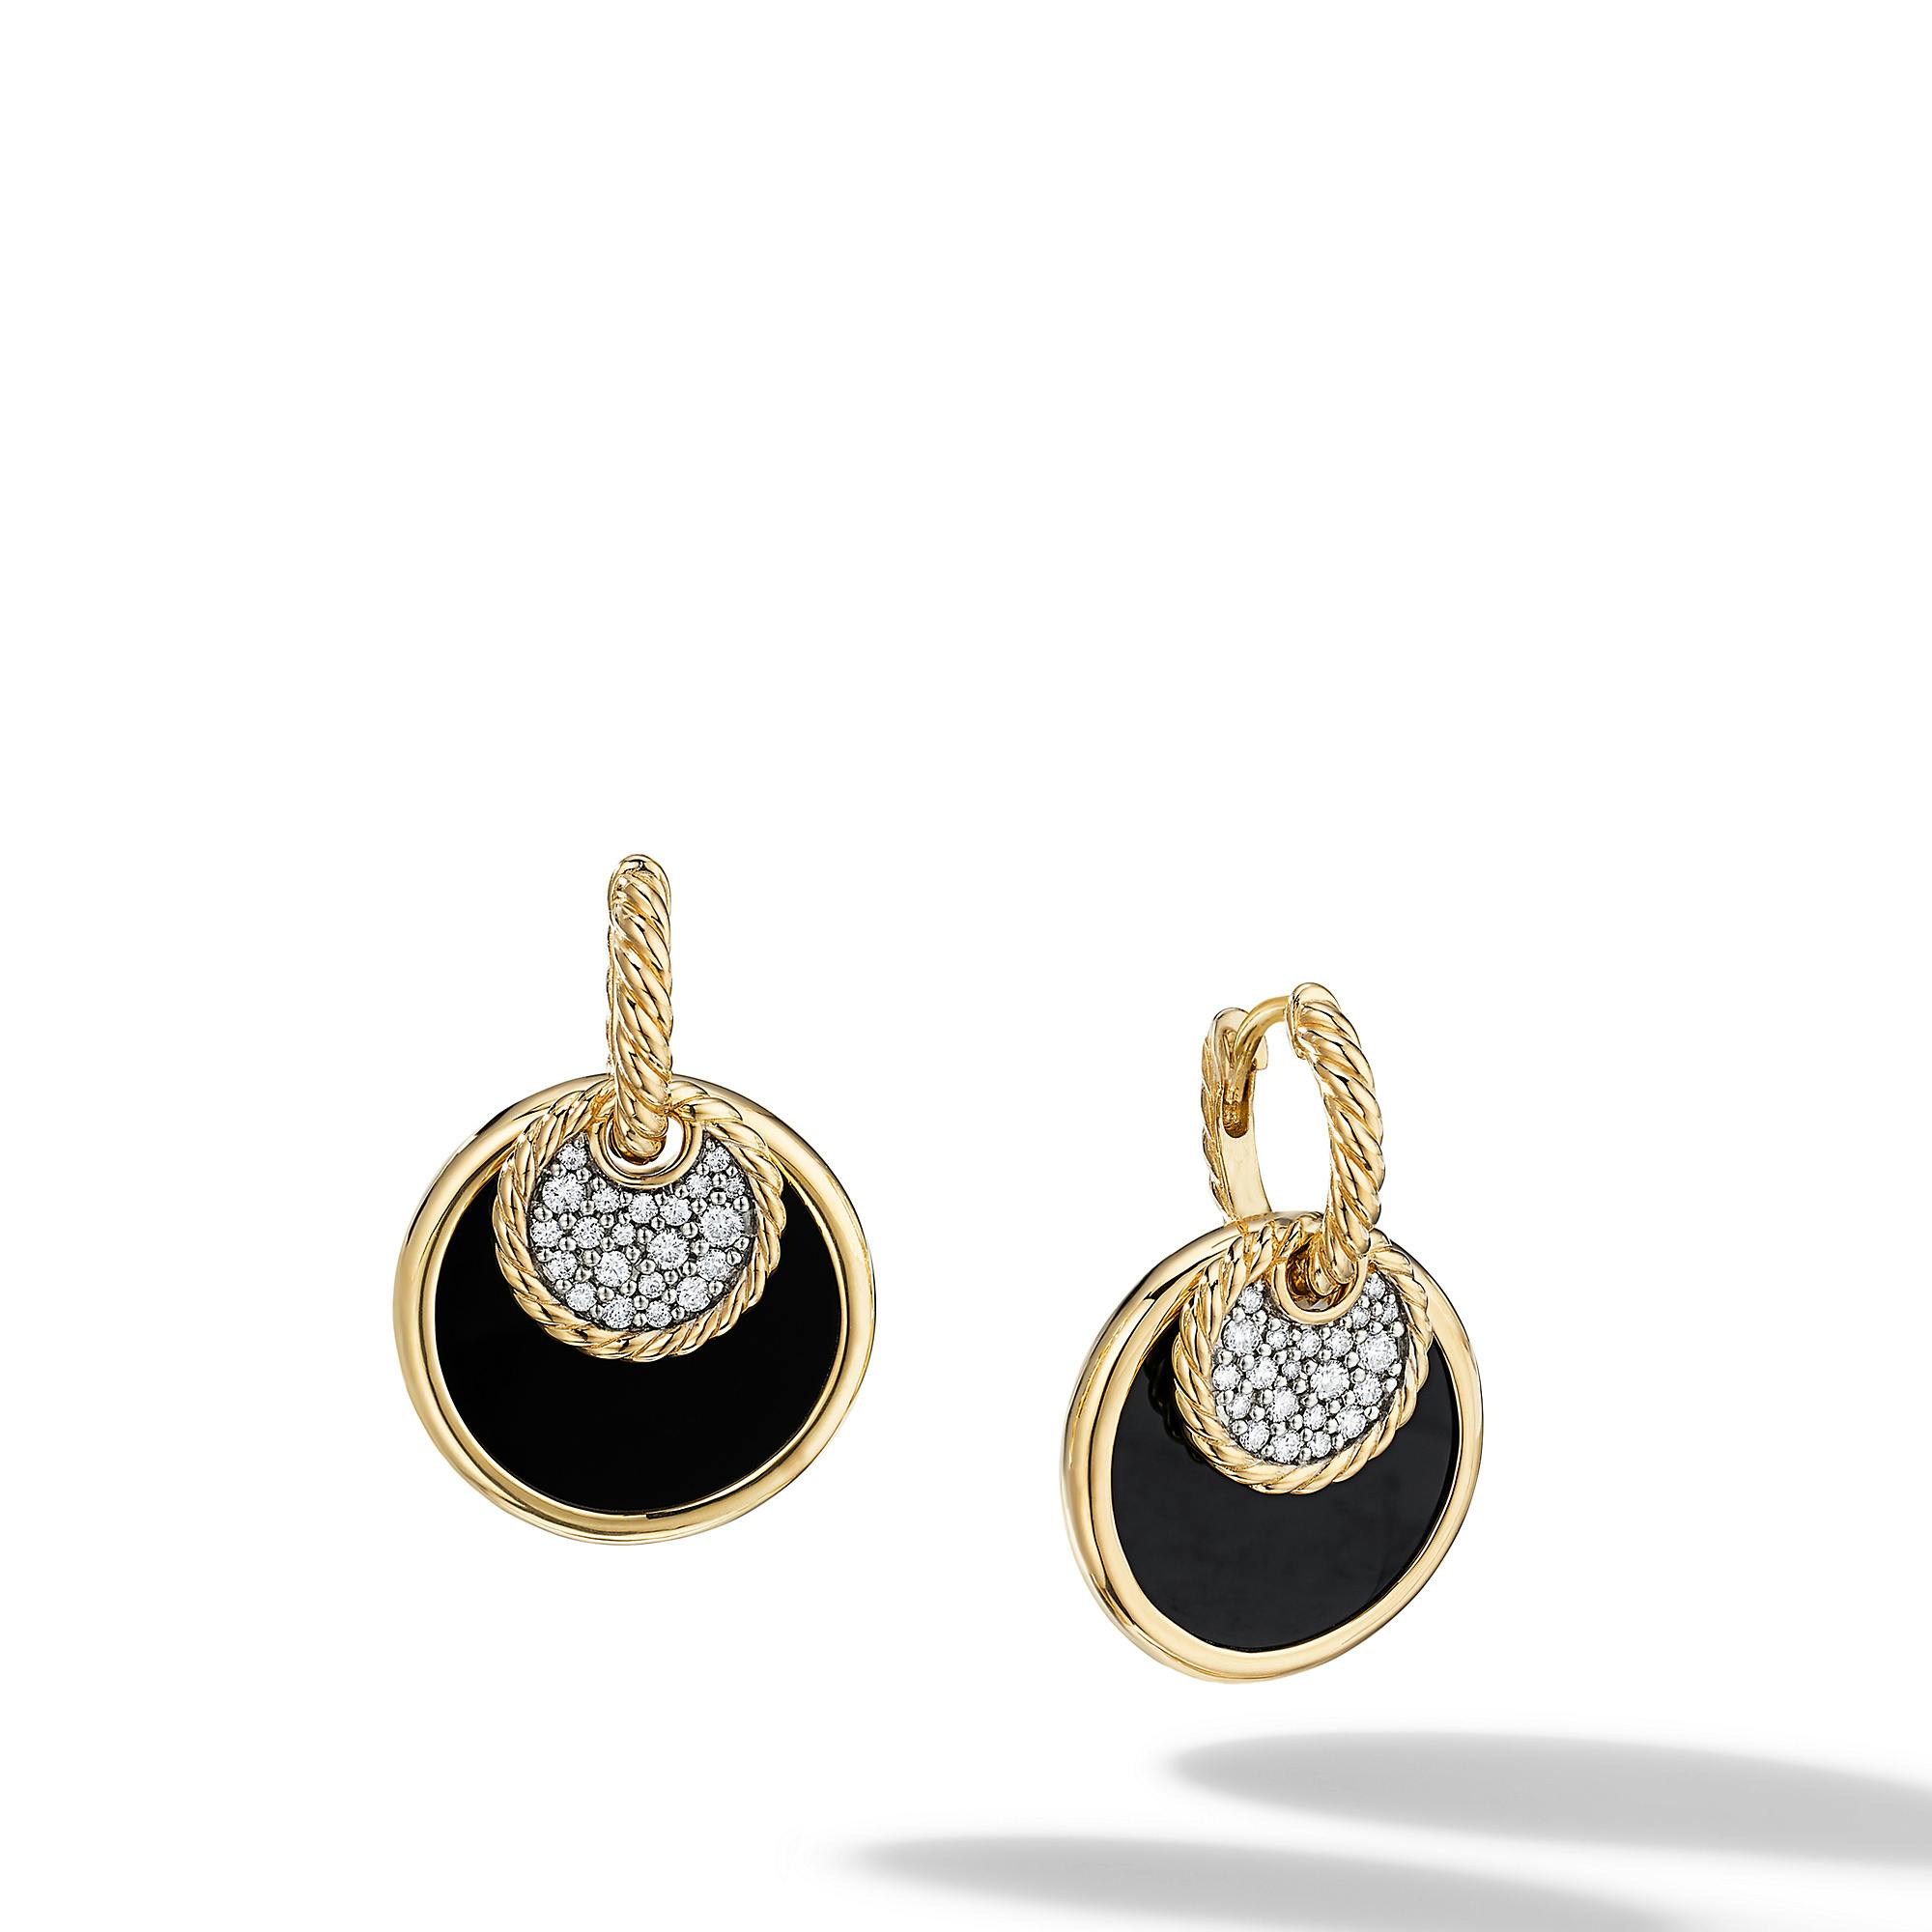 David Yurman DY Elements Convertible Drop Earrings in 18K Yellow Gold with Black Onyx and Mother of Pearl and Pave Diamonds